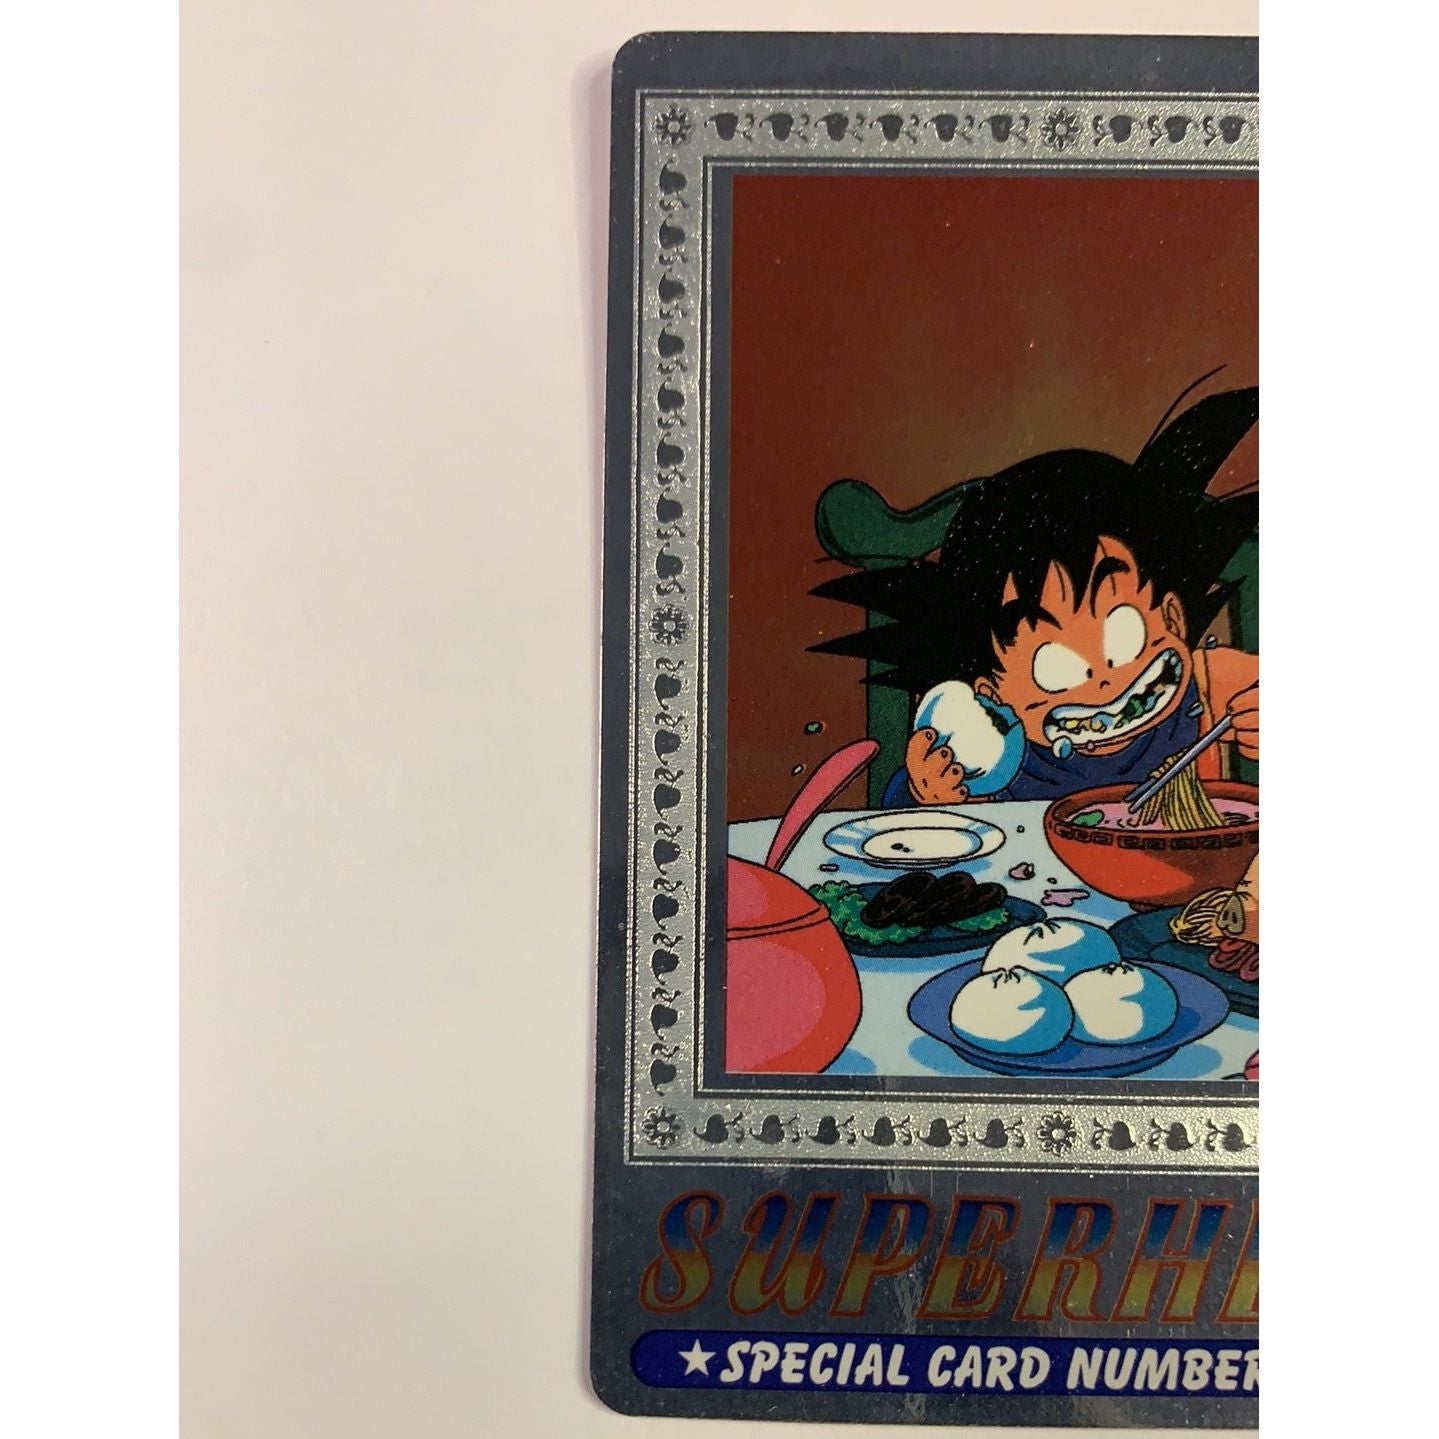  1995 Cardass Adali Super Hero Special Card S-114 Silver Foil Feast  Local Legends Cards & Collectibles